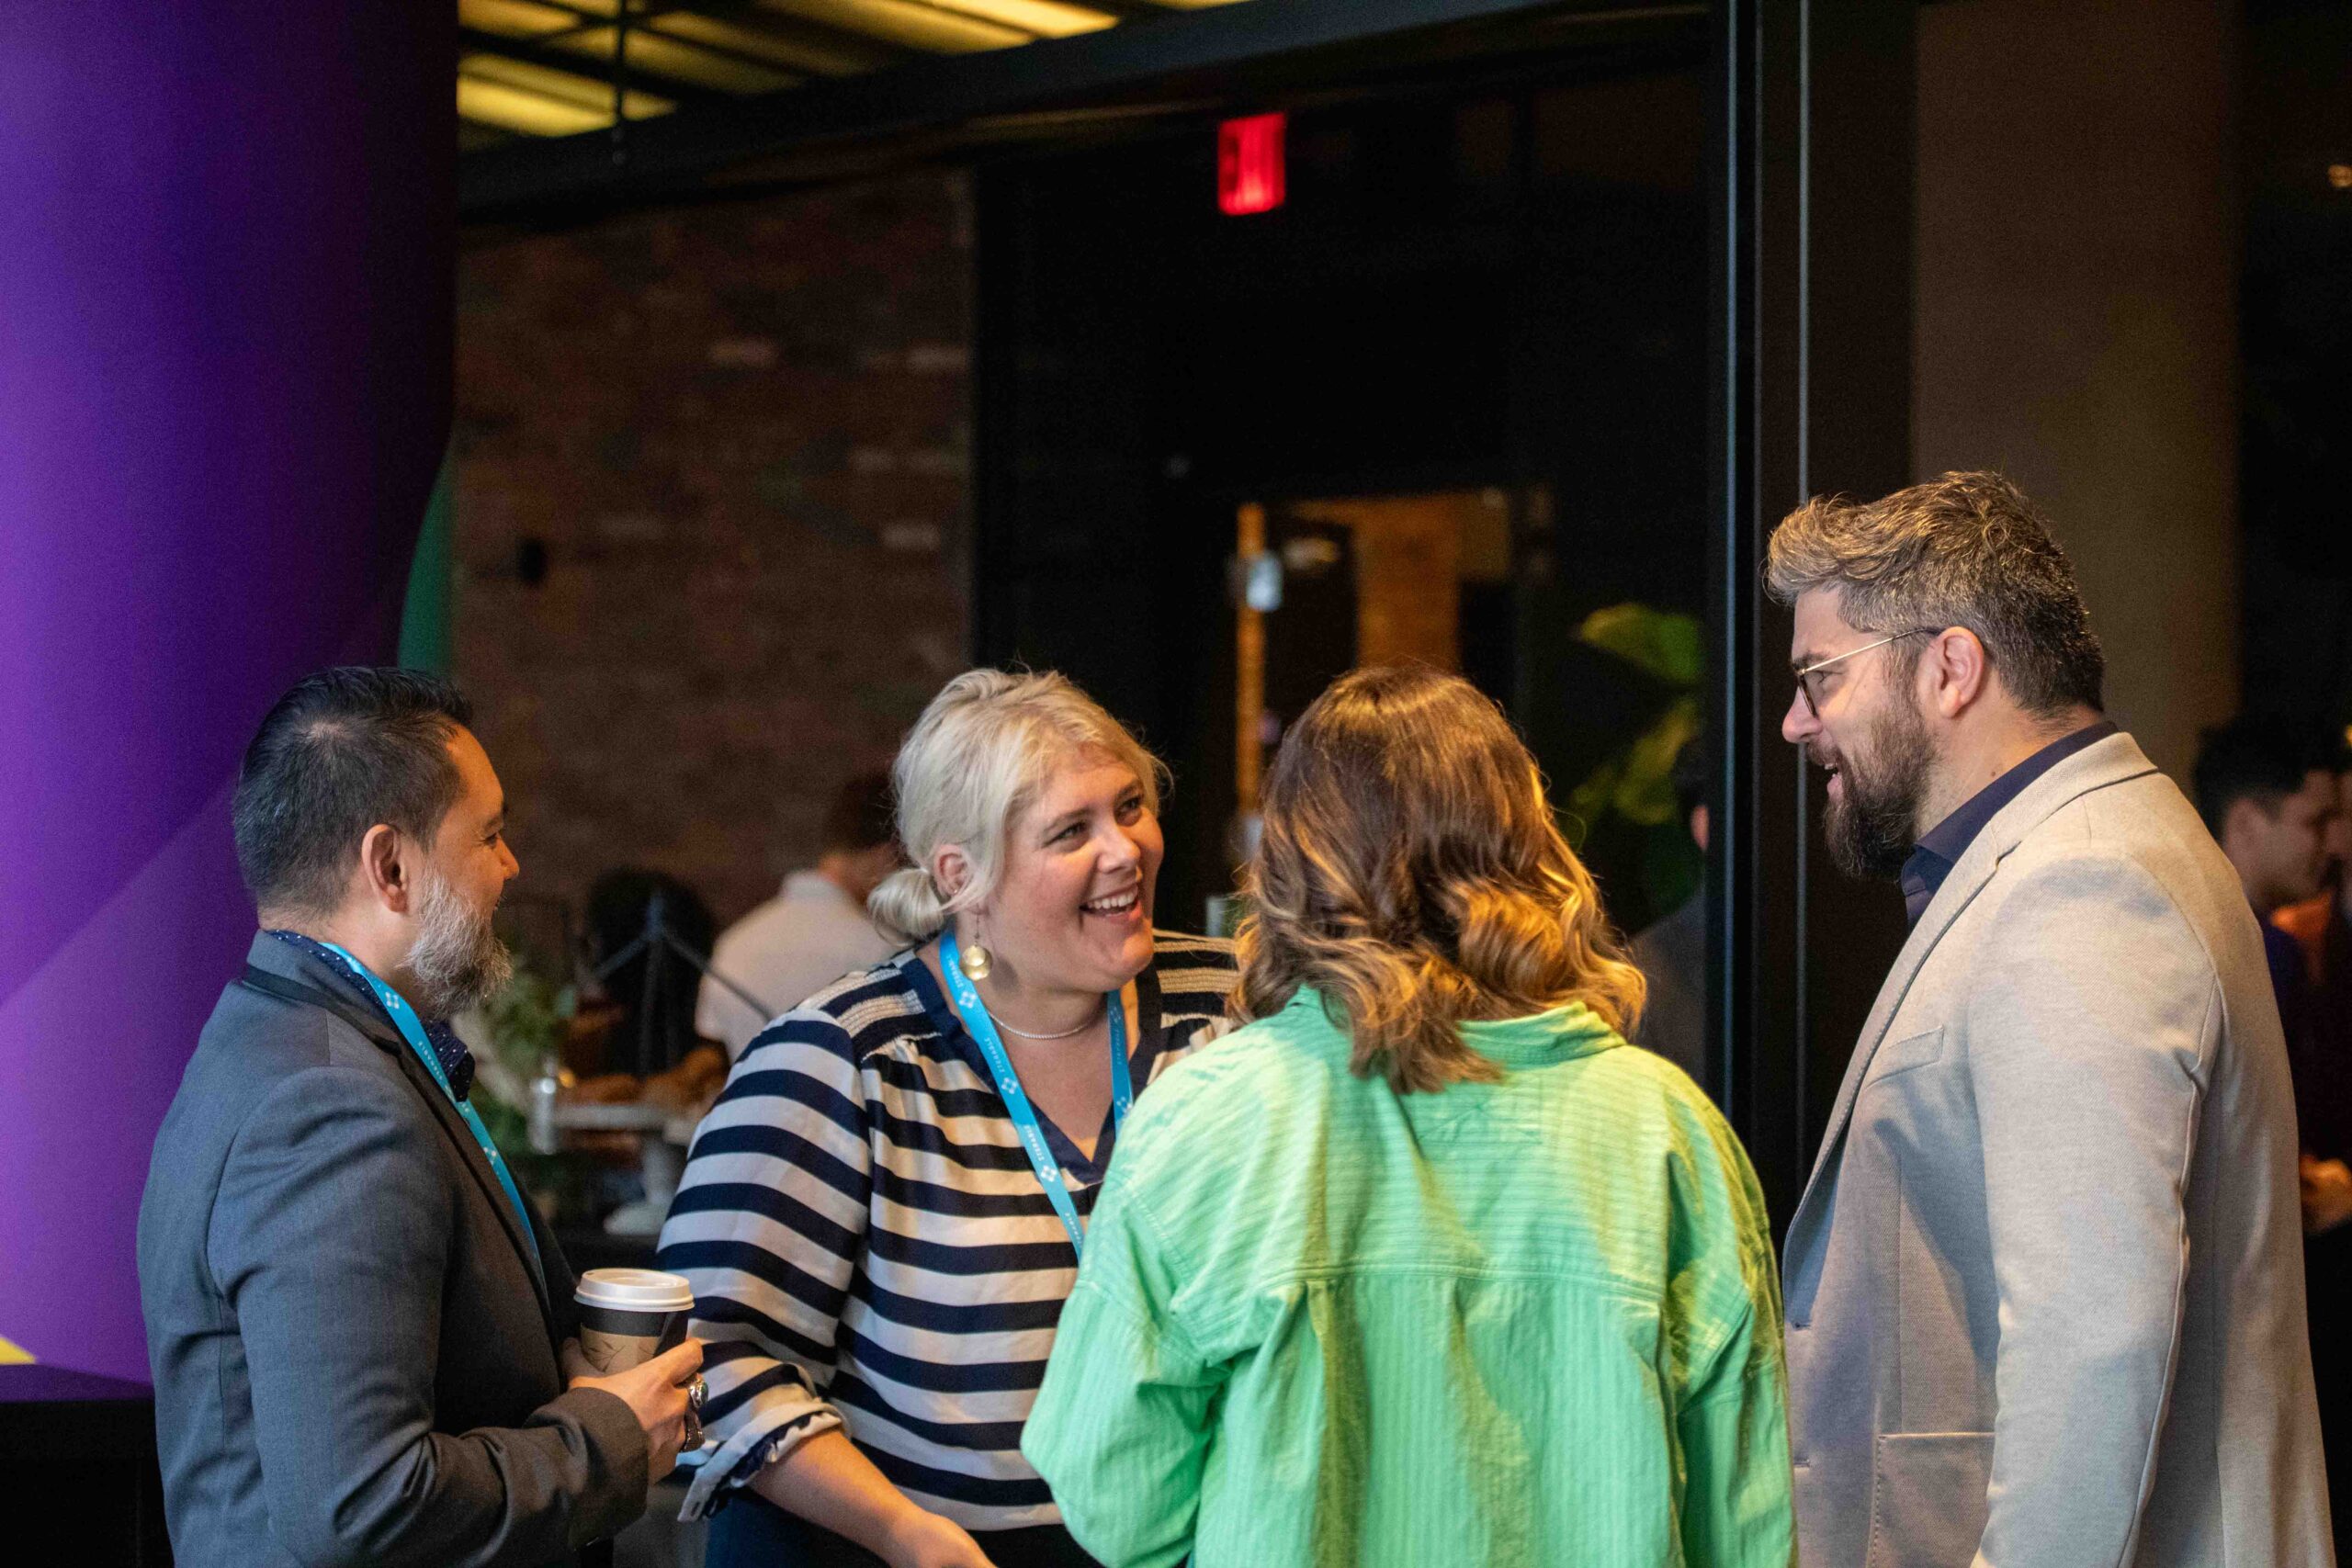 Networking opportunities at Activate New York